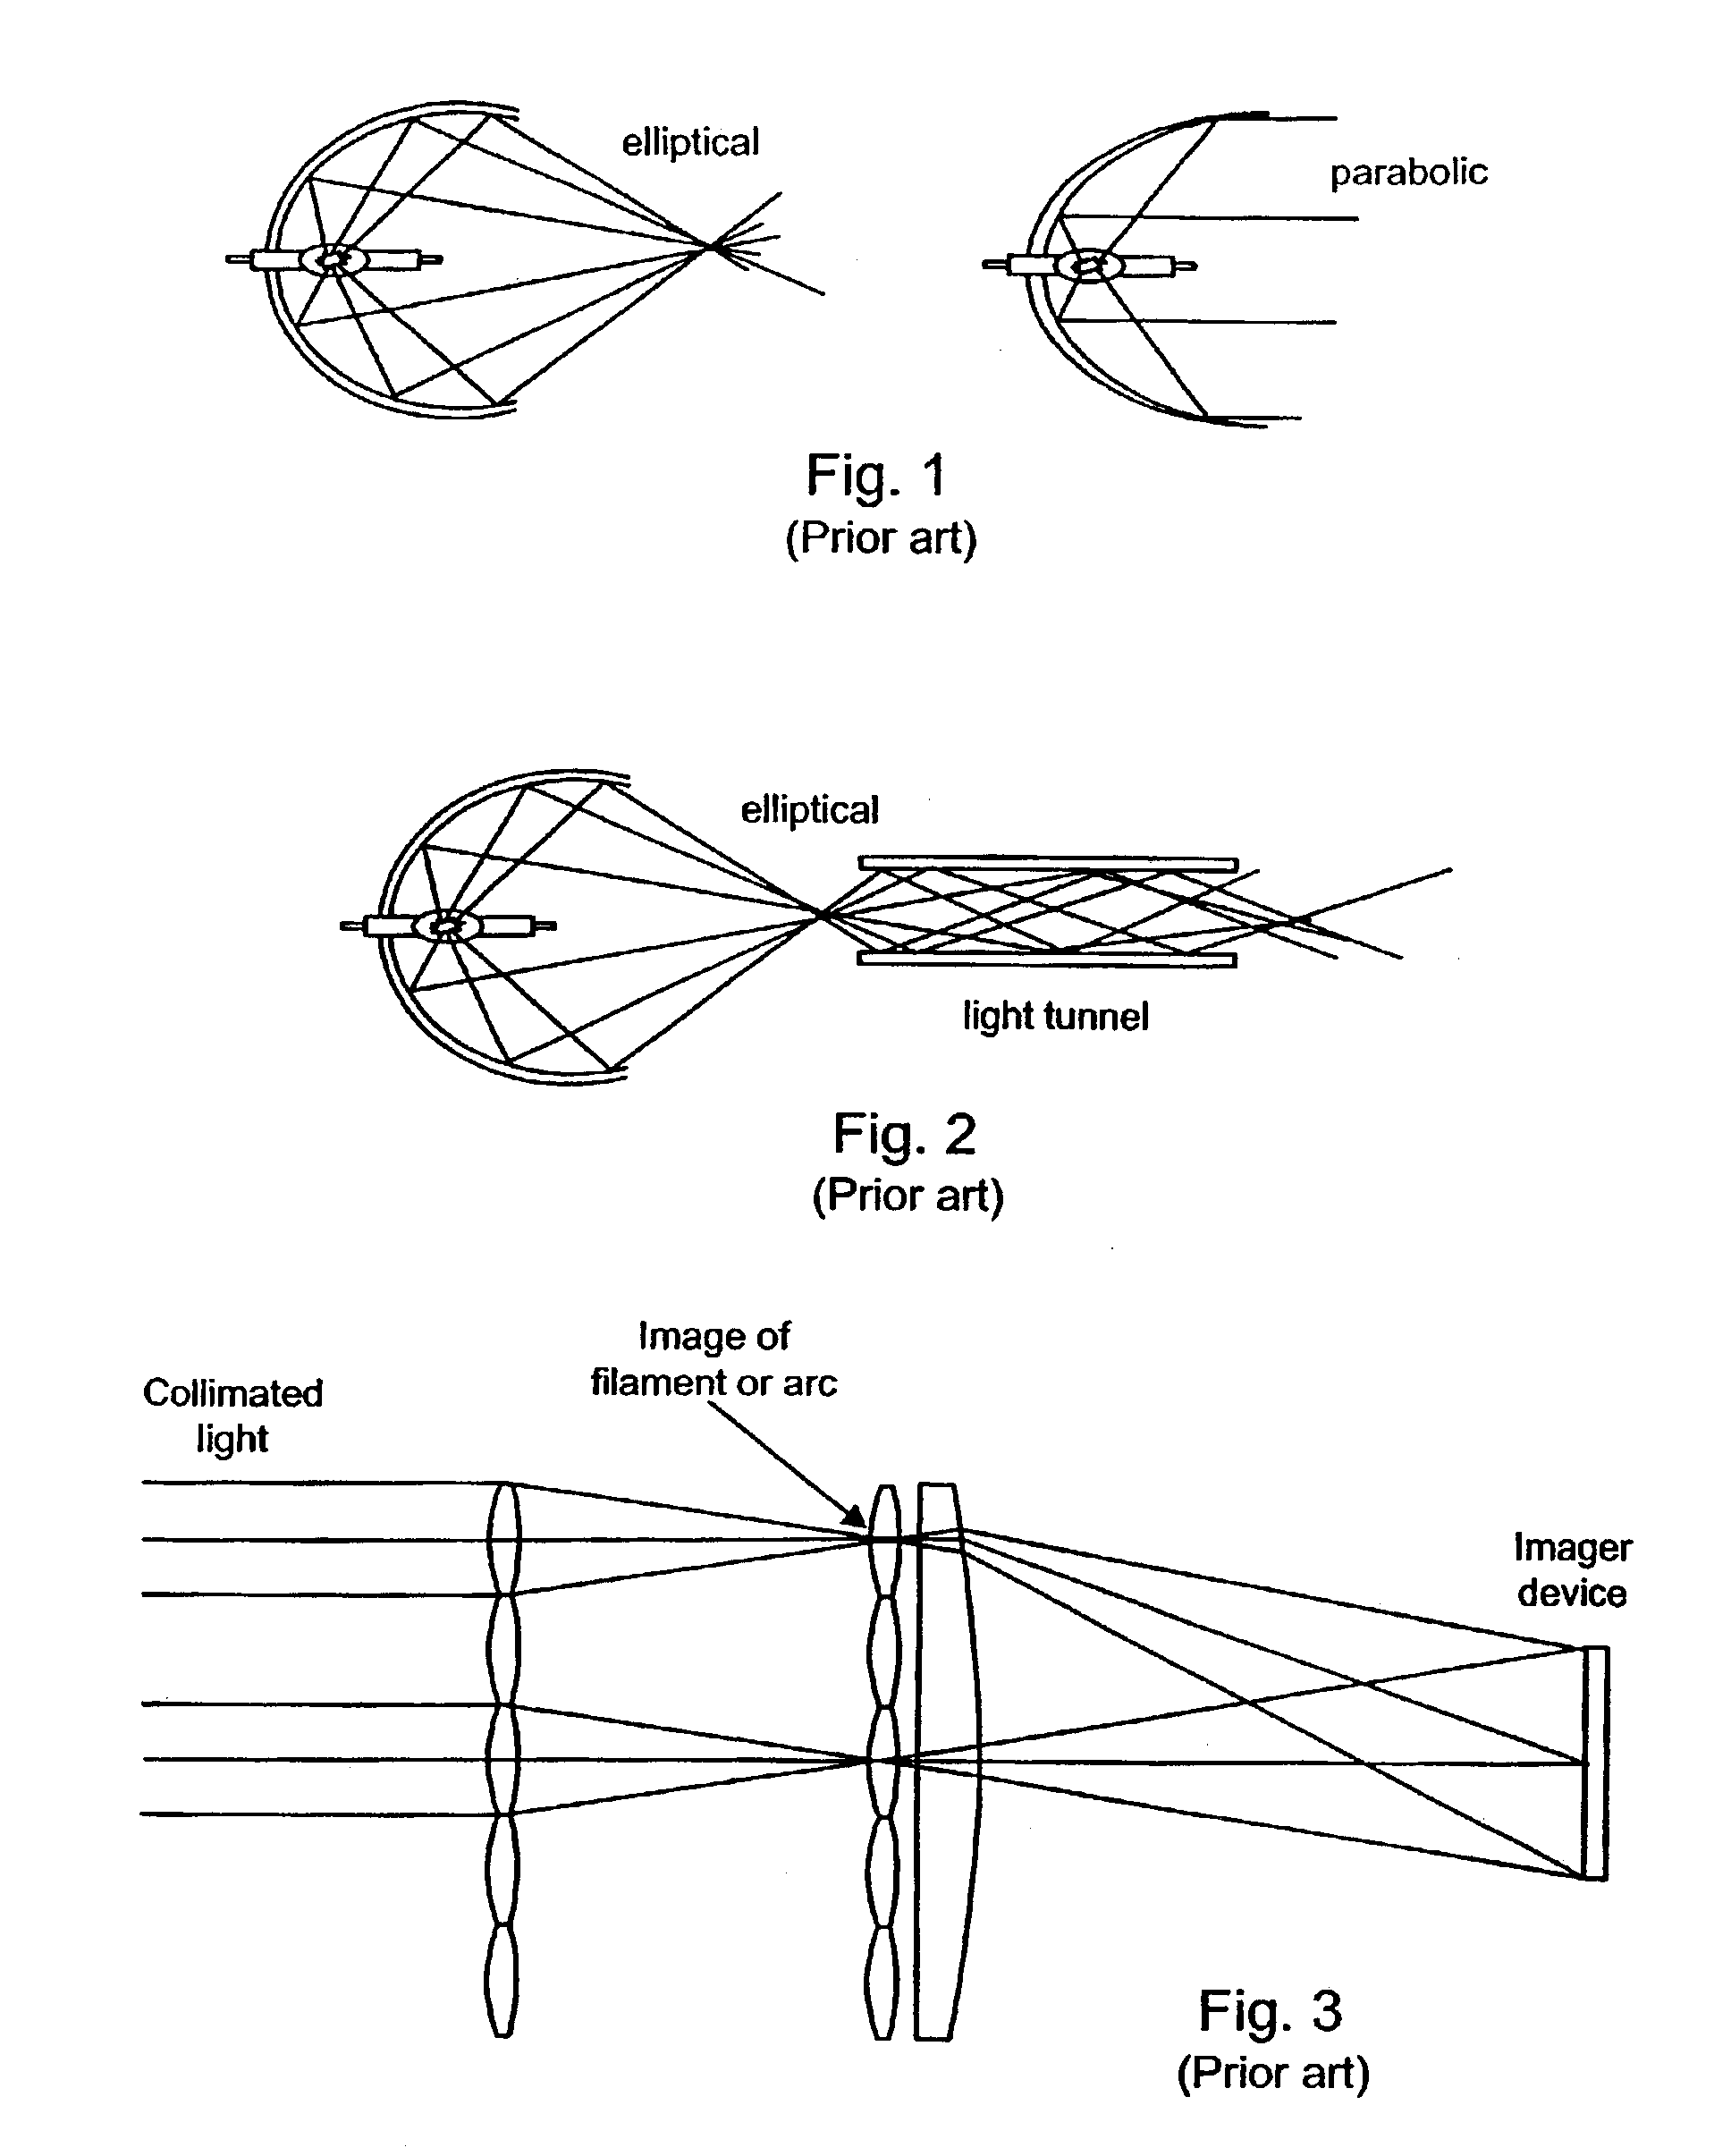 Illumination device and method for laser projector